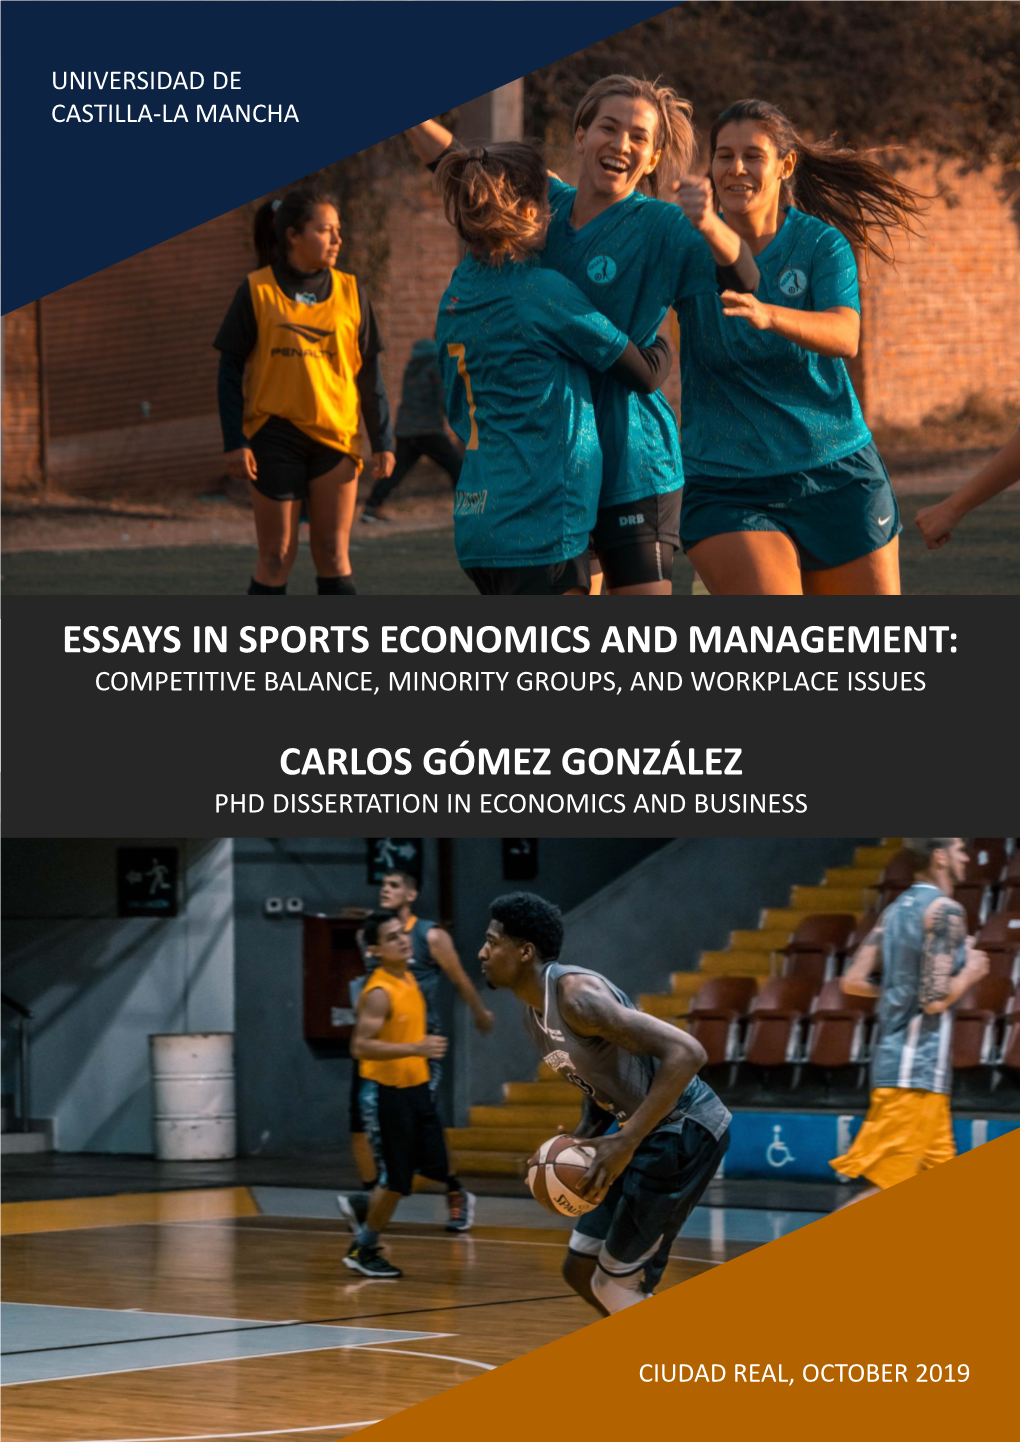 Essays in Sports Economics and Management: Competitive Balance, Minority Groups, and Workplace Issues